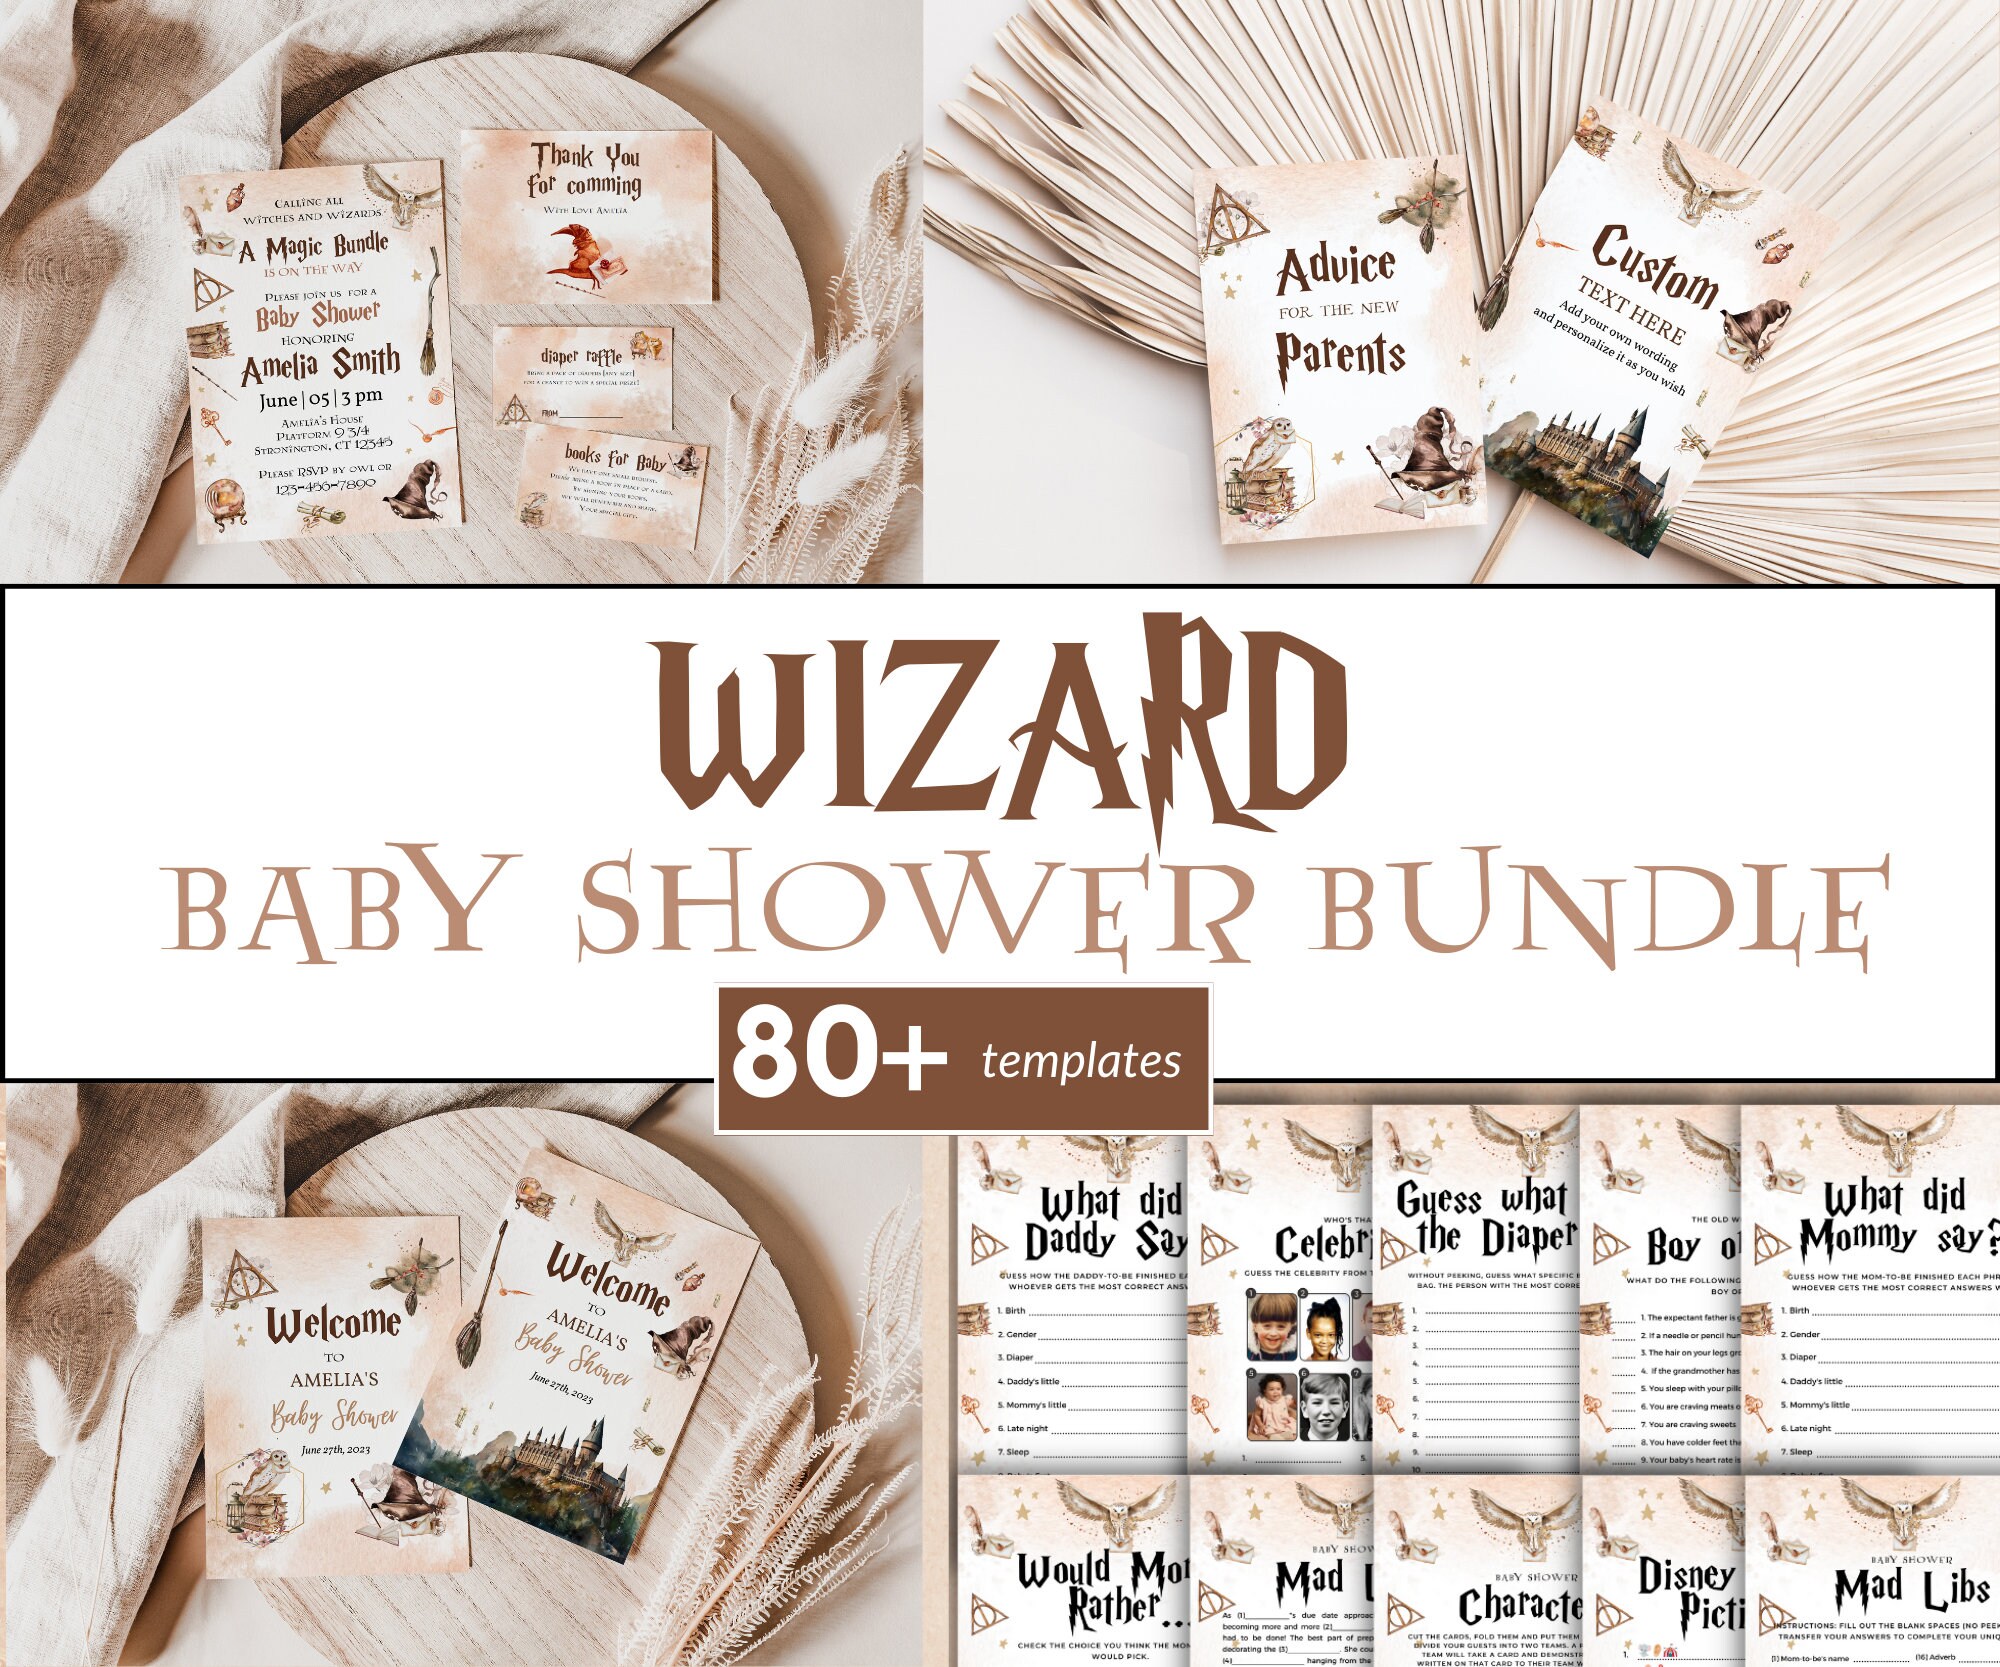 Harry Potter Baby Shower Ideas, Decorations and Favors – Baby